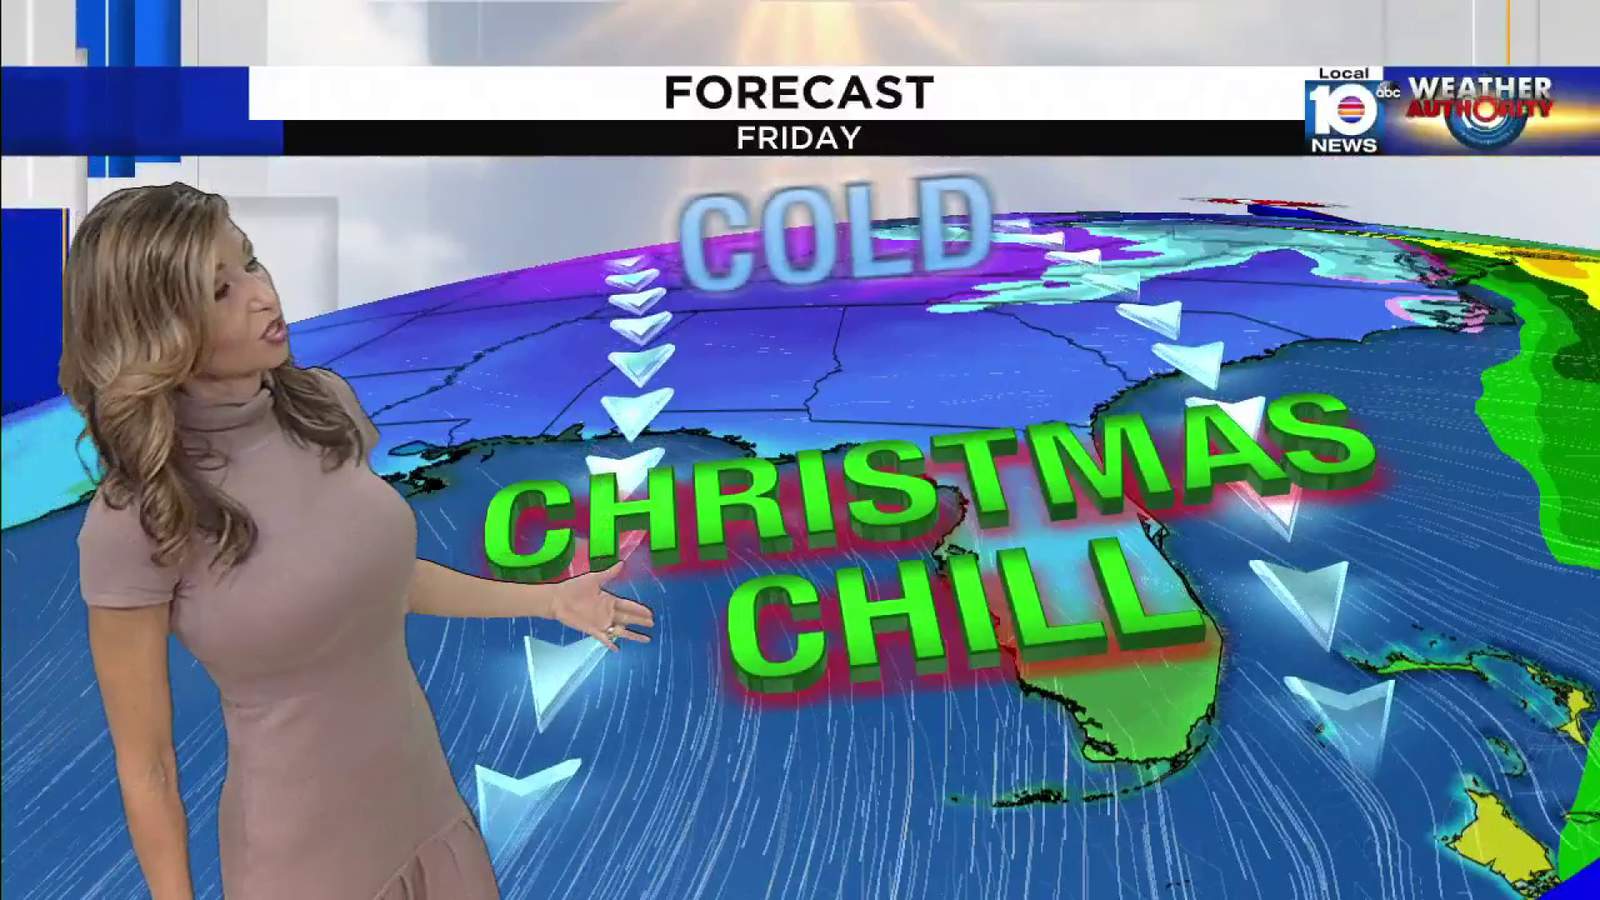 Miami might have its coldest Christmas this century